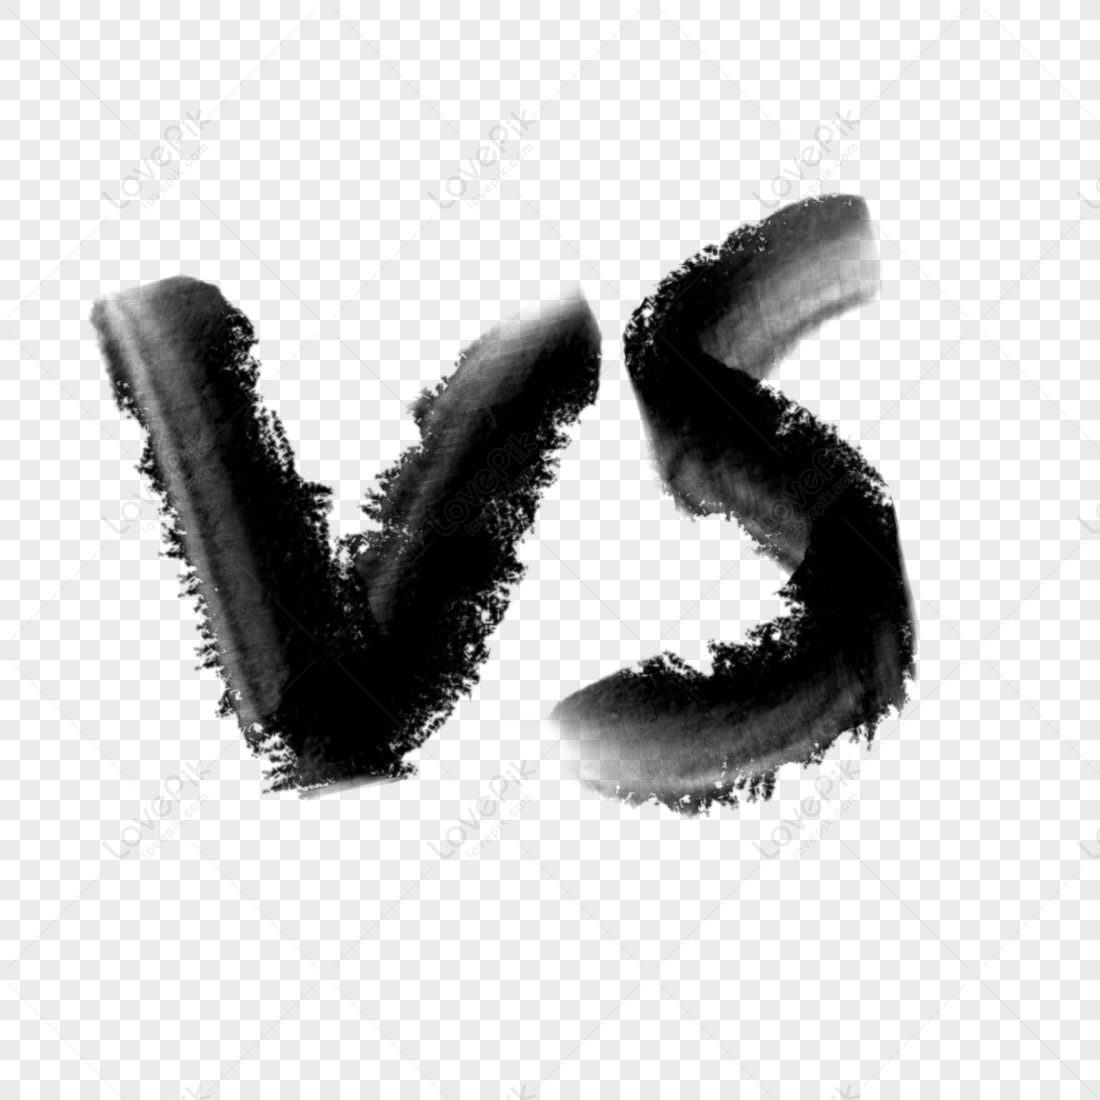 VS Images, HD Pictures For Free Vectors Download - Lovepik.com